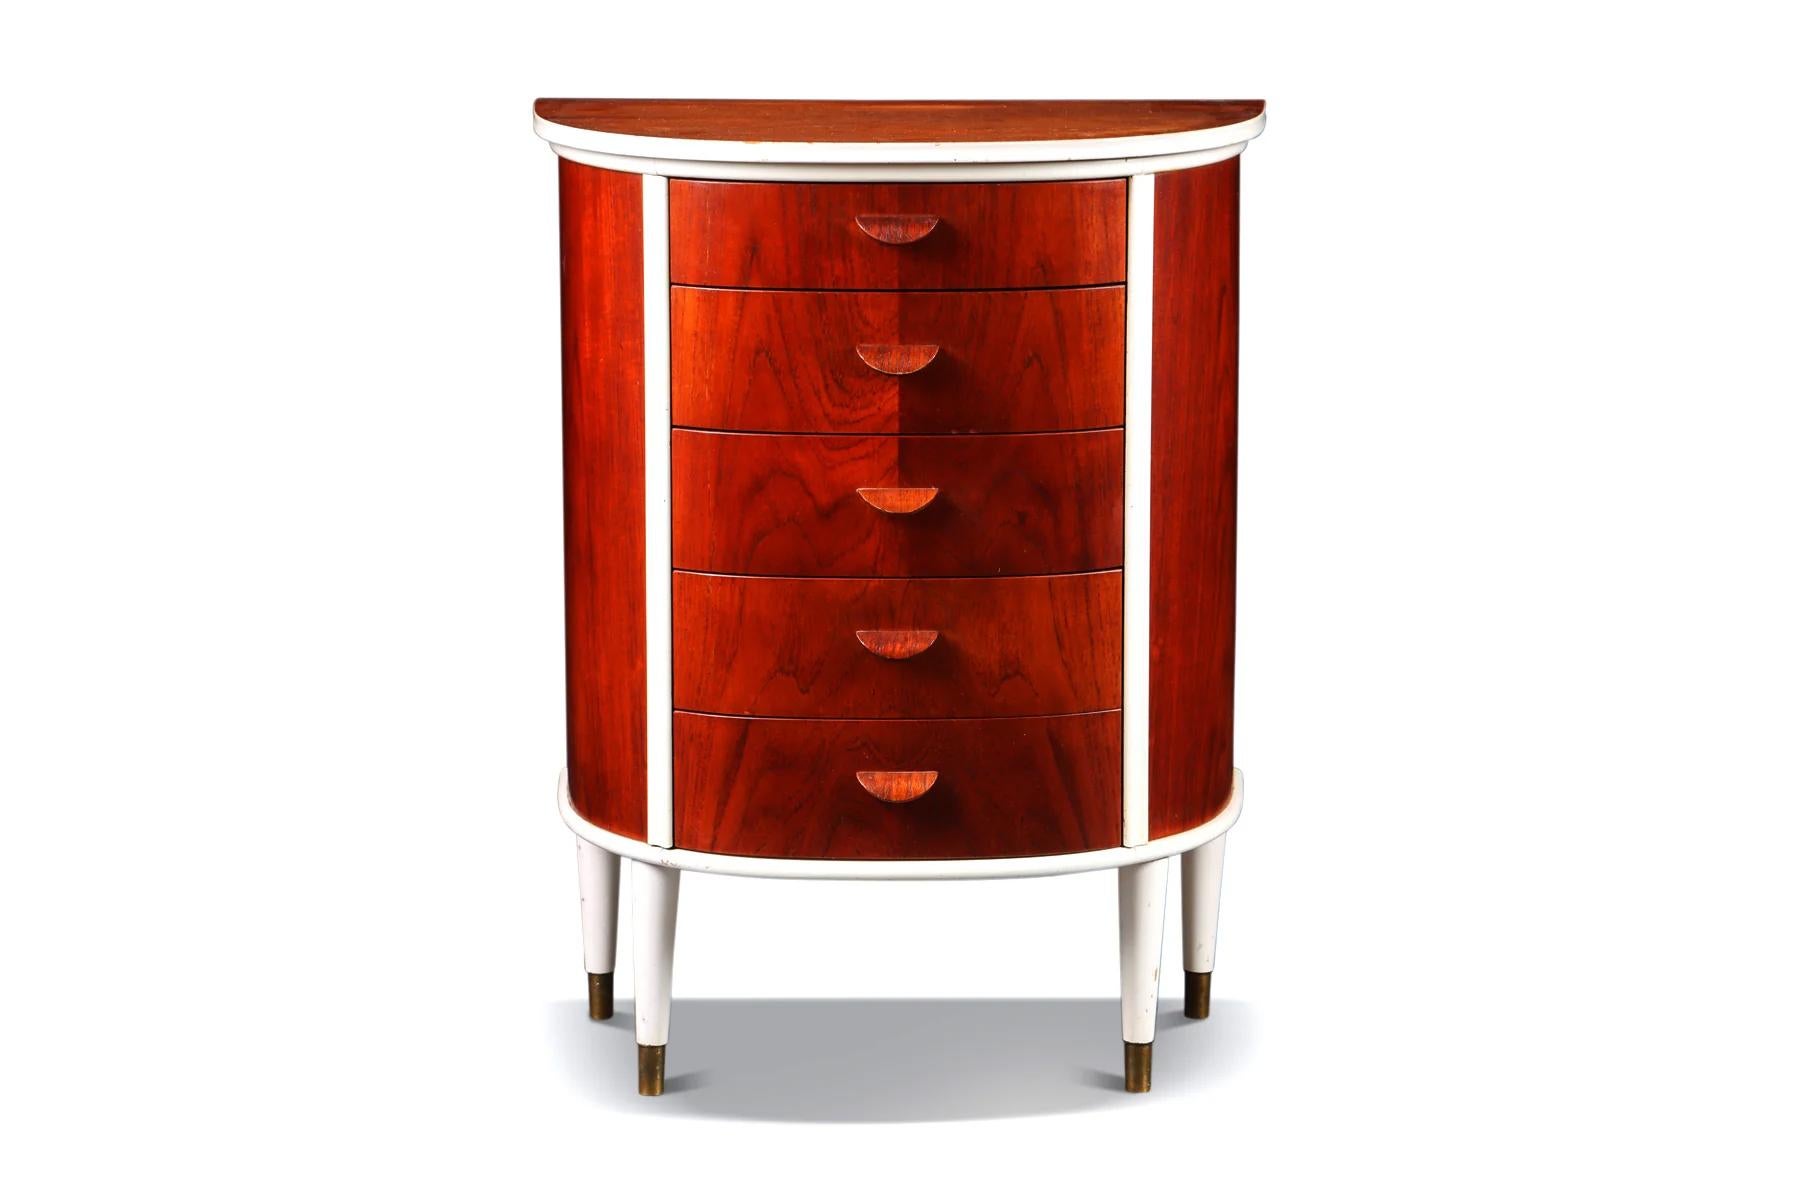 Origin: Denmark
Designer: Unknown
Manufacturer: Unknown
Era: 1960s
Materials: Teak, Lacquer
Measurements: 25″ wide x 14.5″ deep x 32.25″ tall

Condition: In excellent original condition with typical wear for its vintage. Price includes restoration /